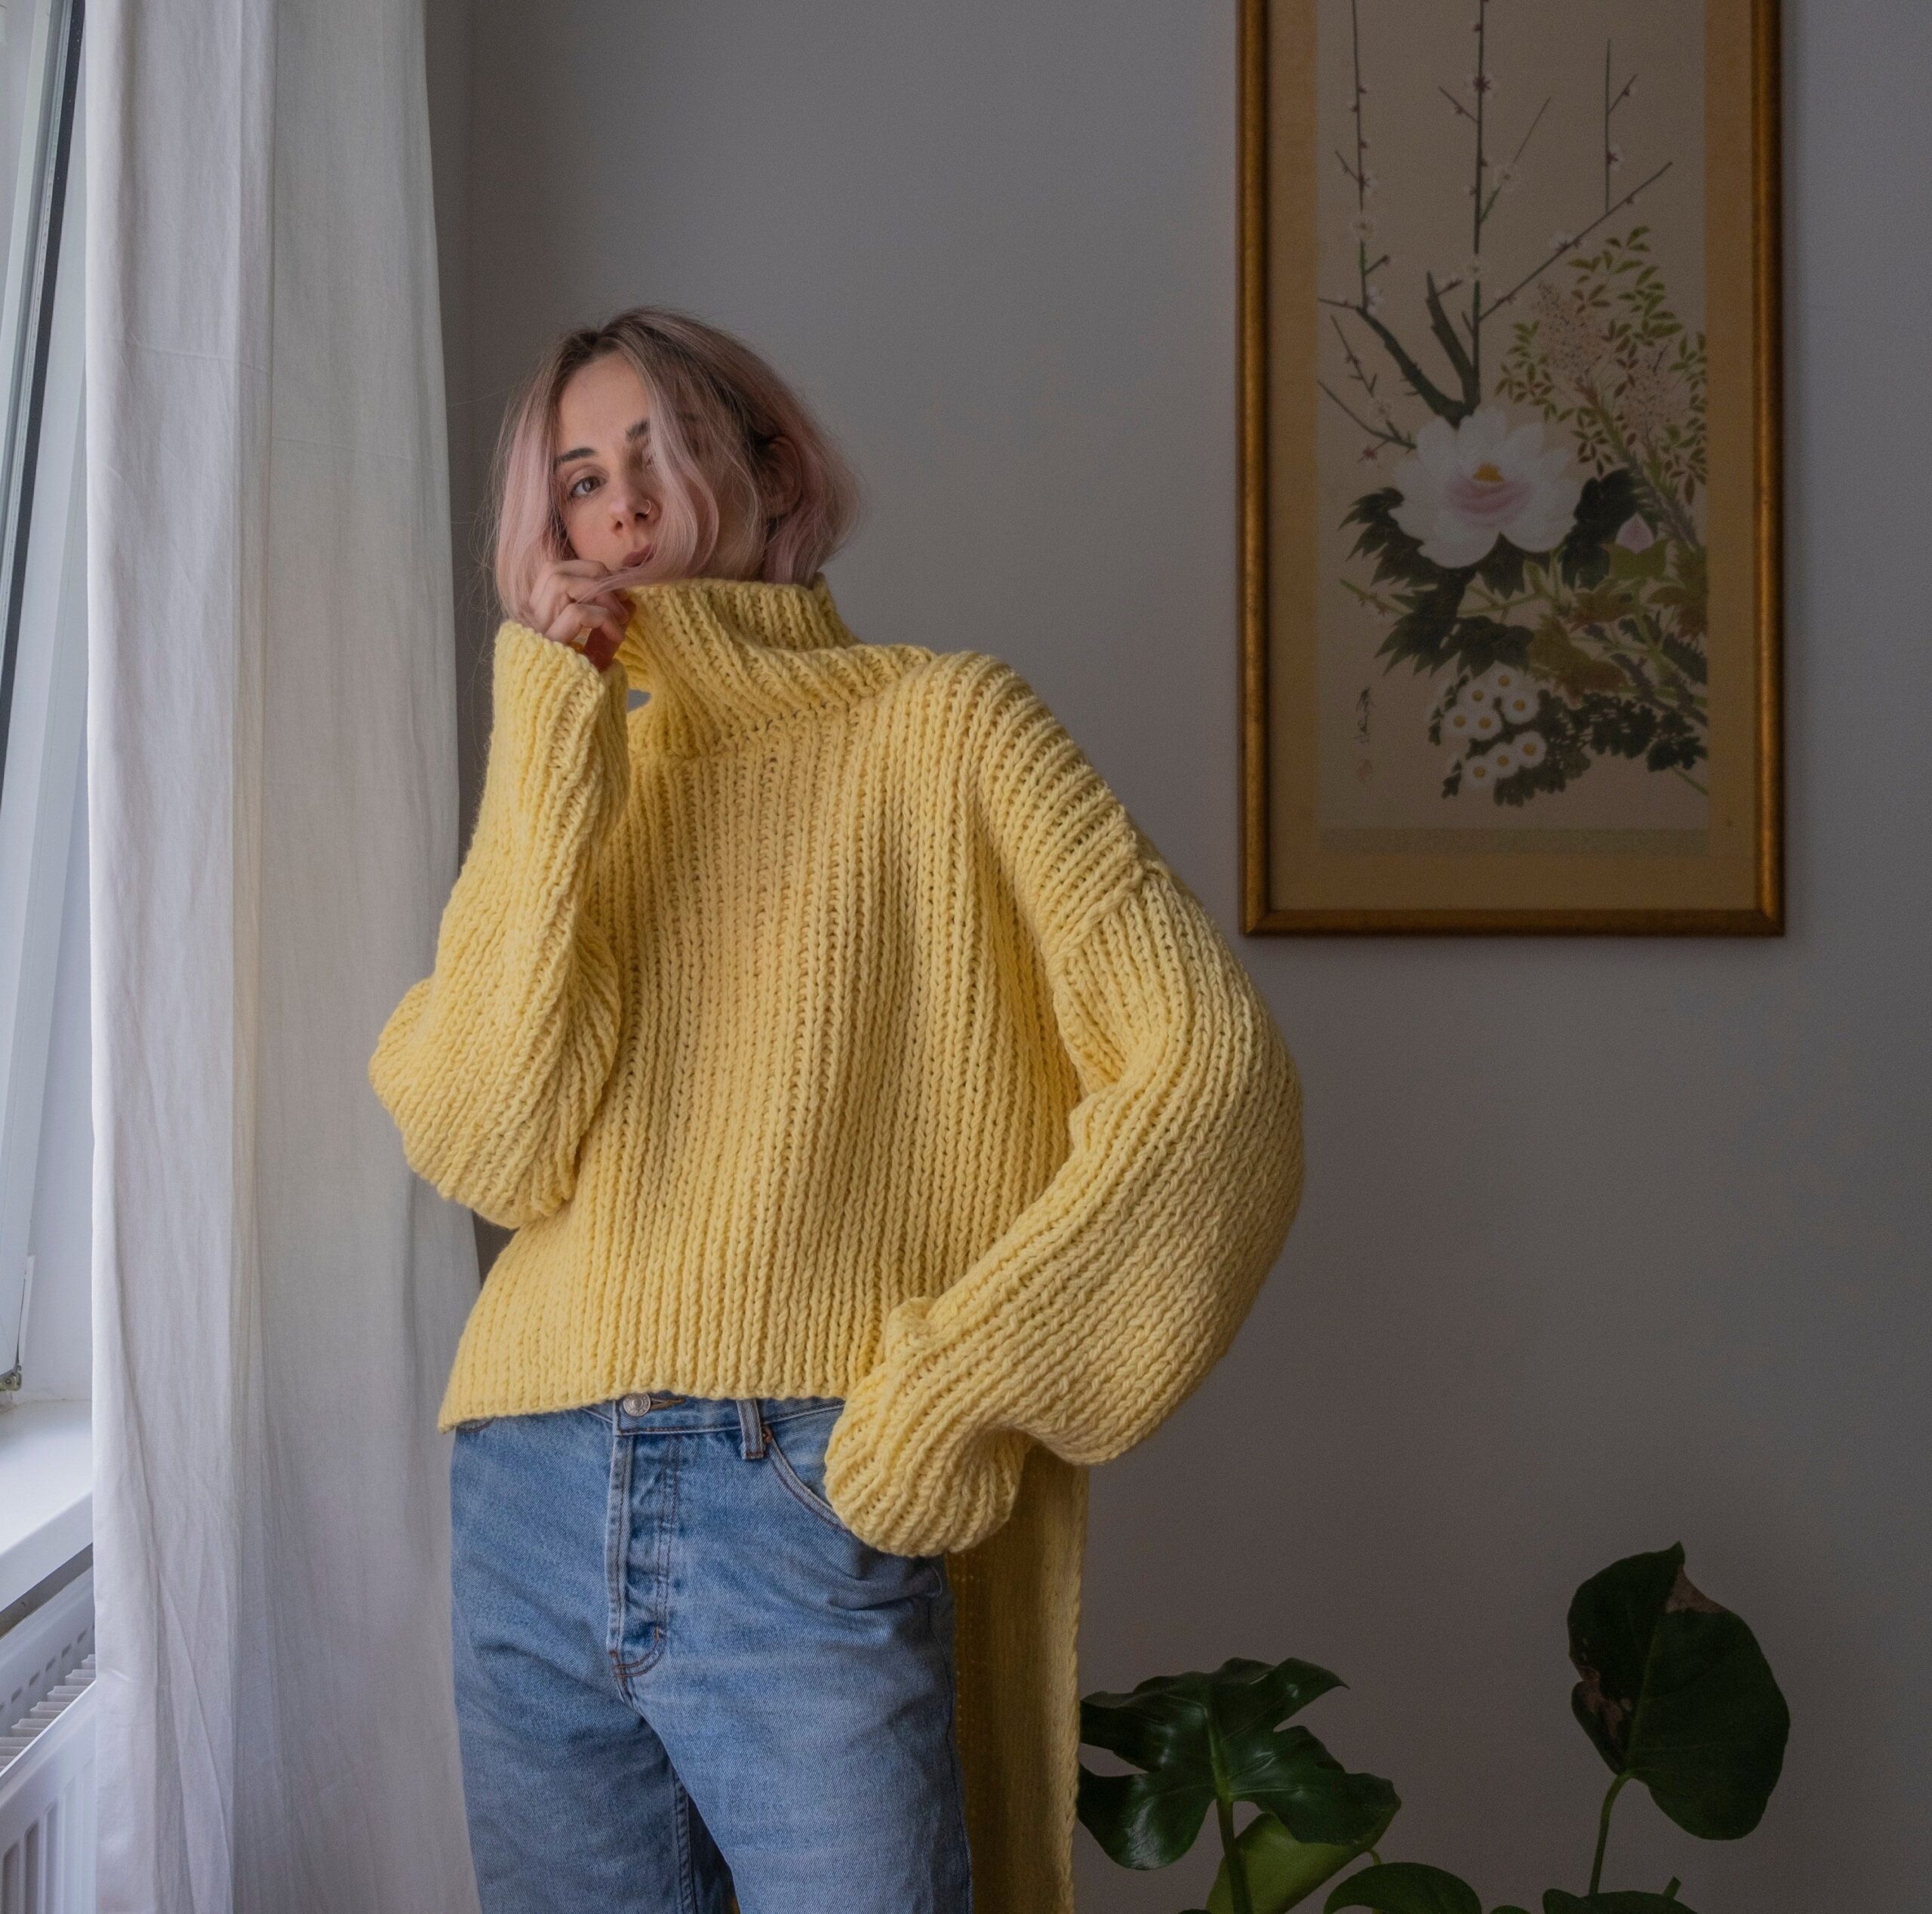 How to Wear Mustard Yellow Sweater: Top 15 Cheerful Outfit Ideas for Ladies